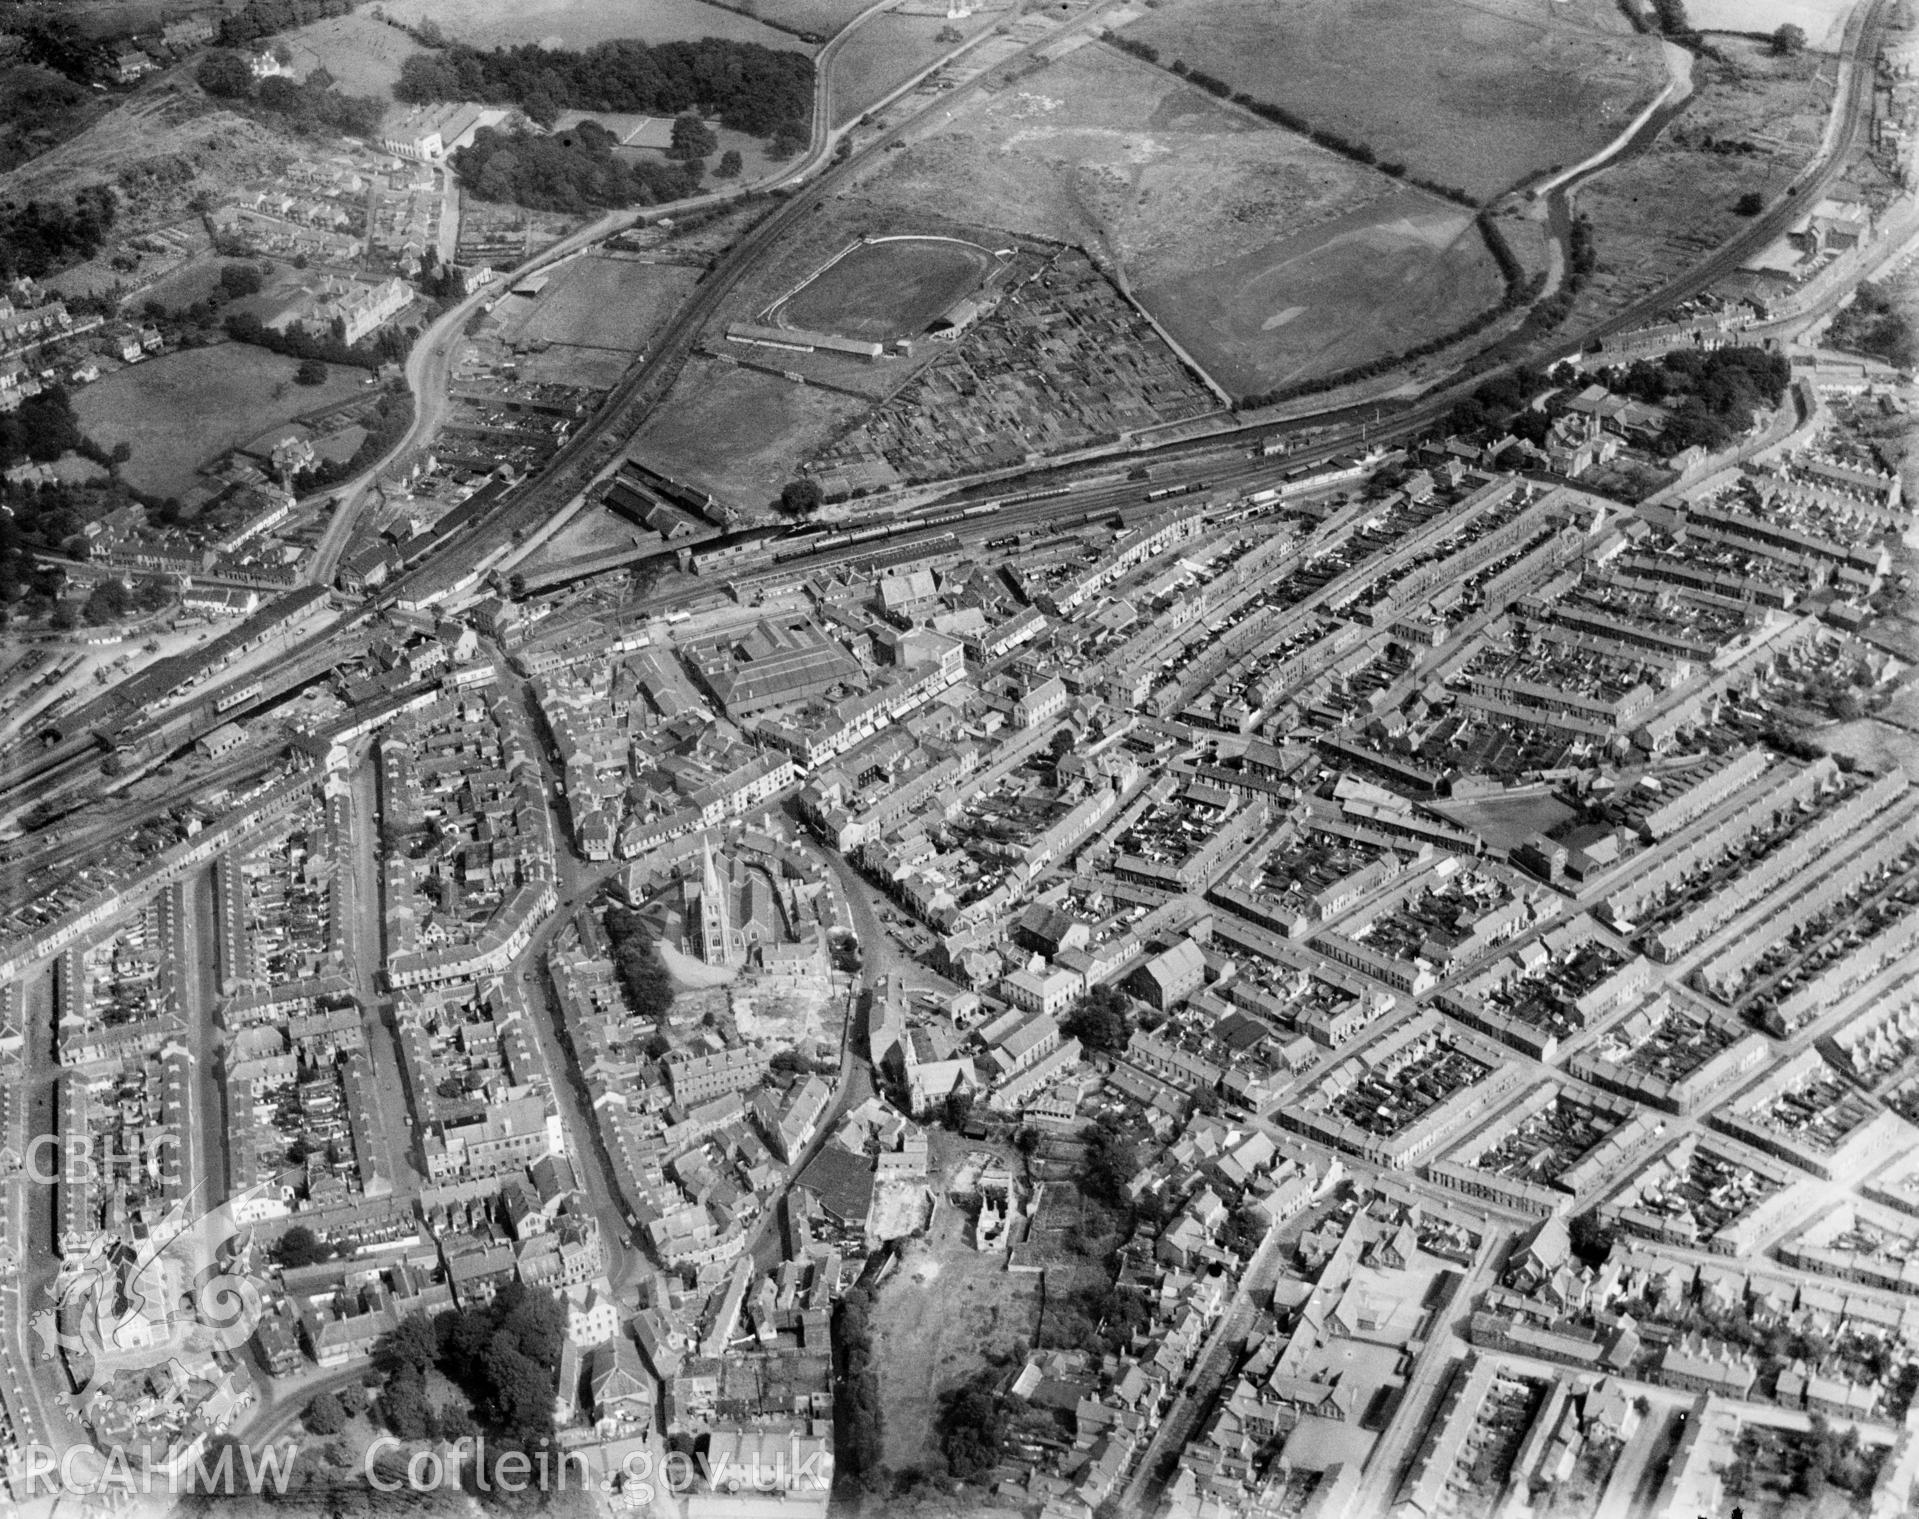 View of Aberdare showing distant view of Ynys Stadium, oblique aerial view. 5?x4? black and white glass plate negative.